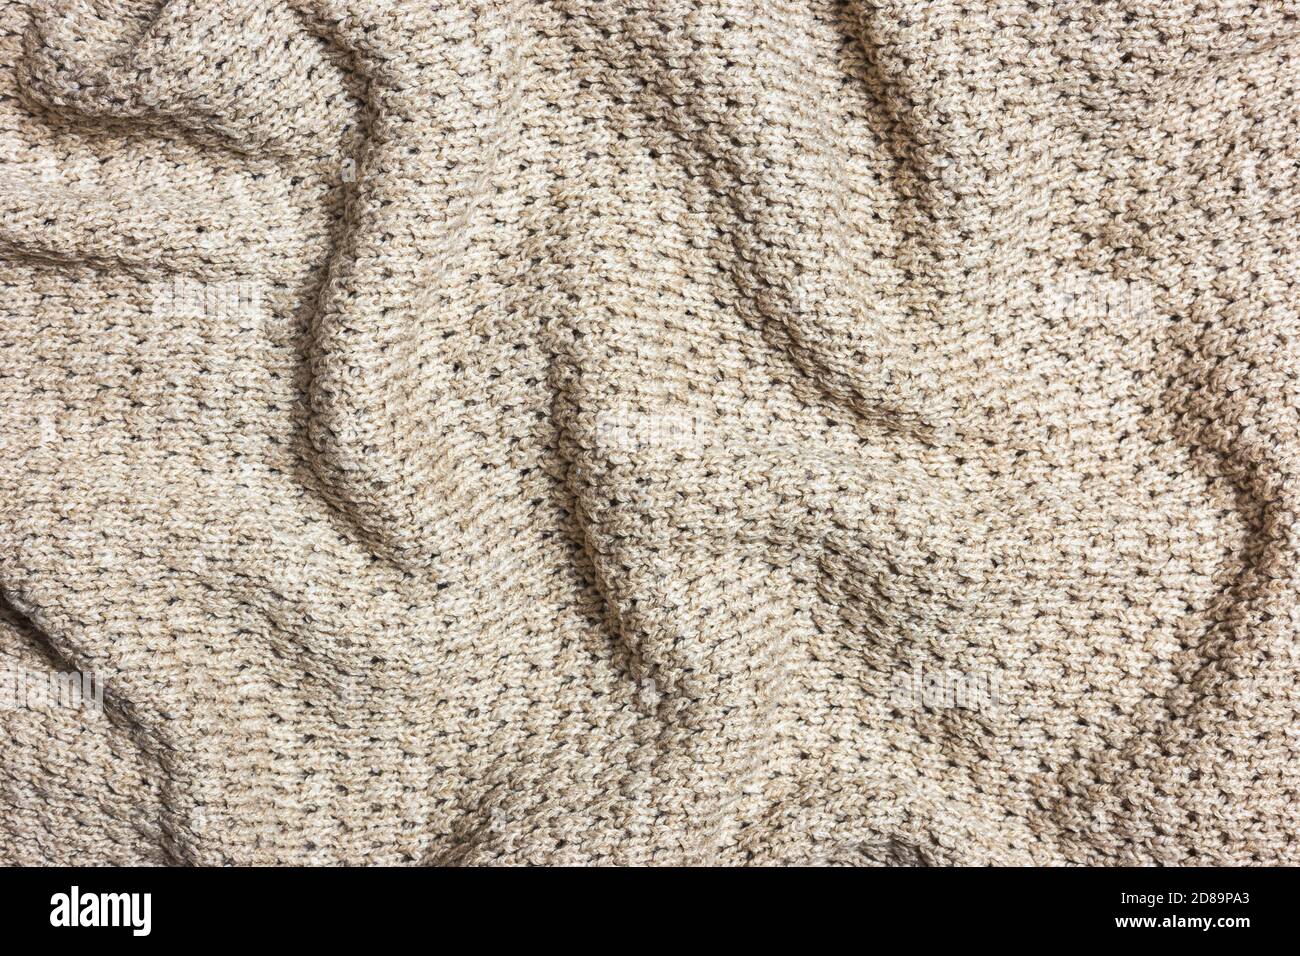 Premium Photo  Real beige melange or ombre knitted fabric with ornamental  pattern textured background detailed warm yarn background